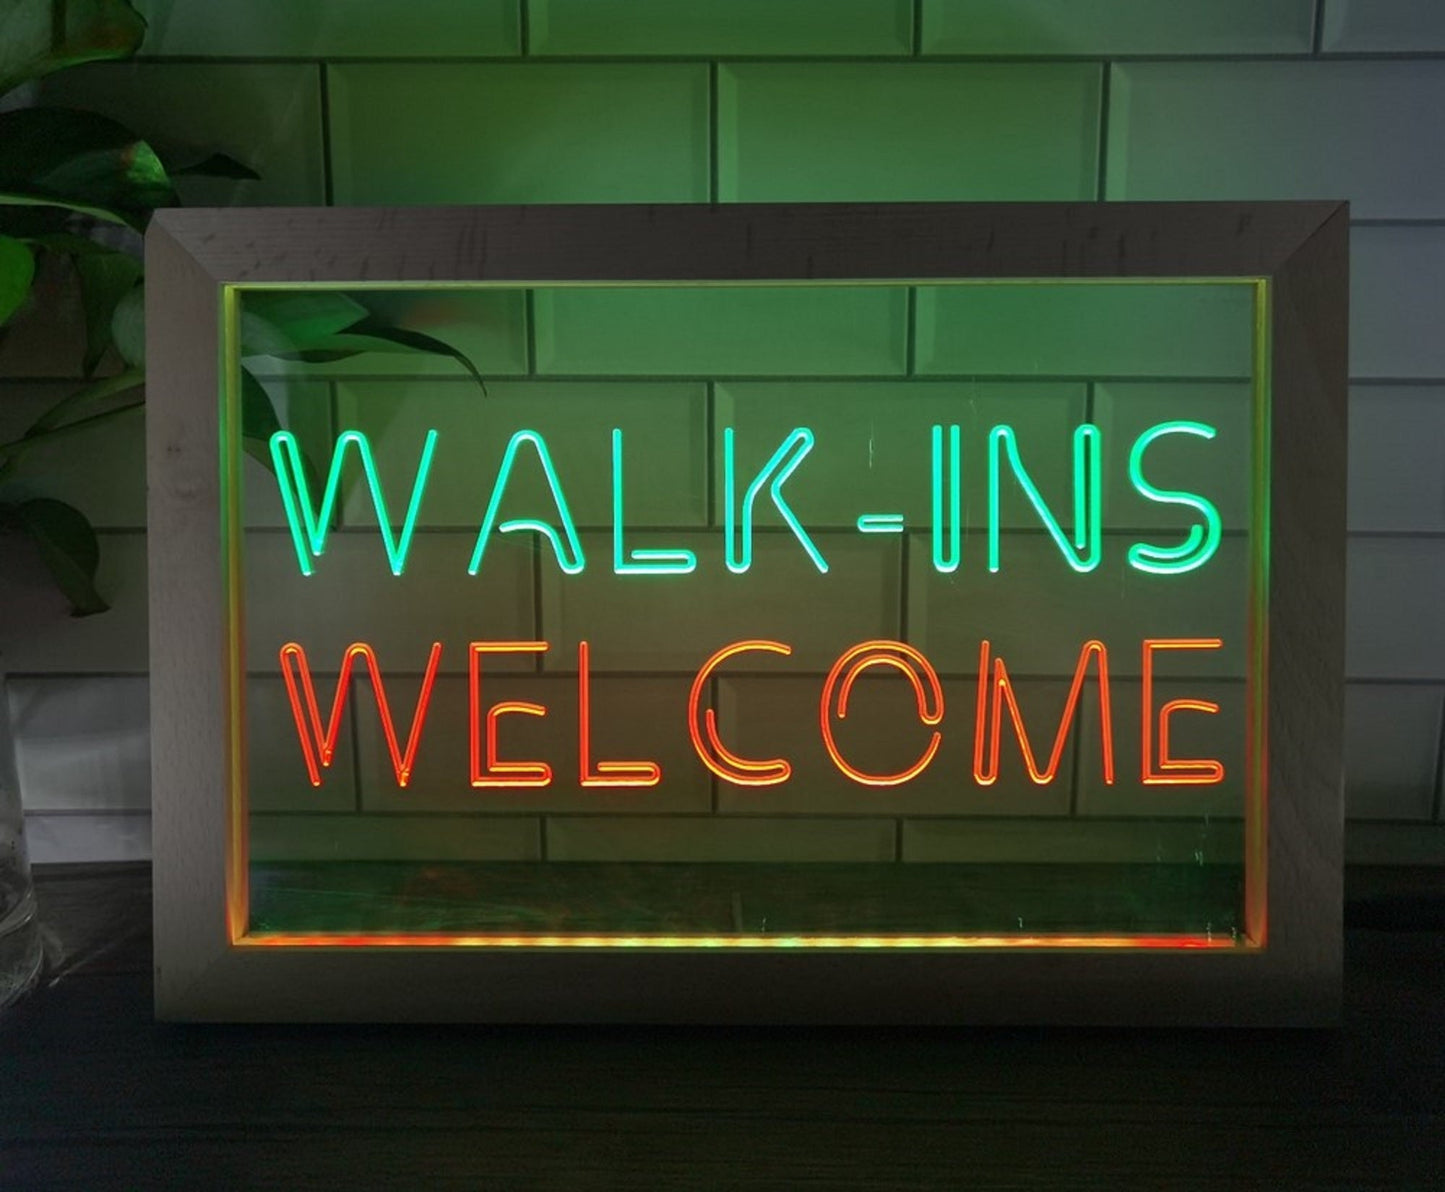 Neon Sign Framed Dual Color Walk Ins Welcome Store Shop Restaurant Coffee Shop Decor Free Shipping